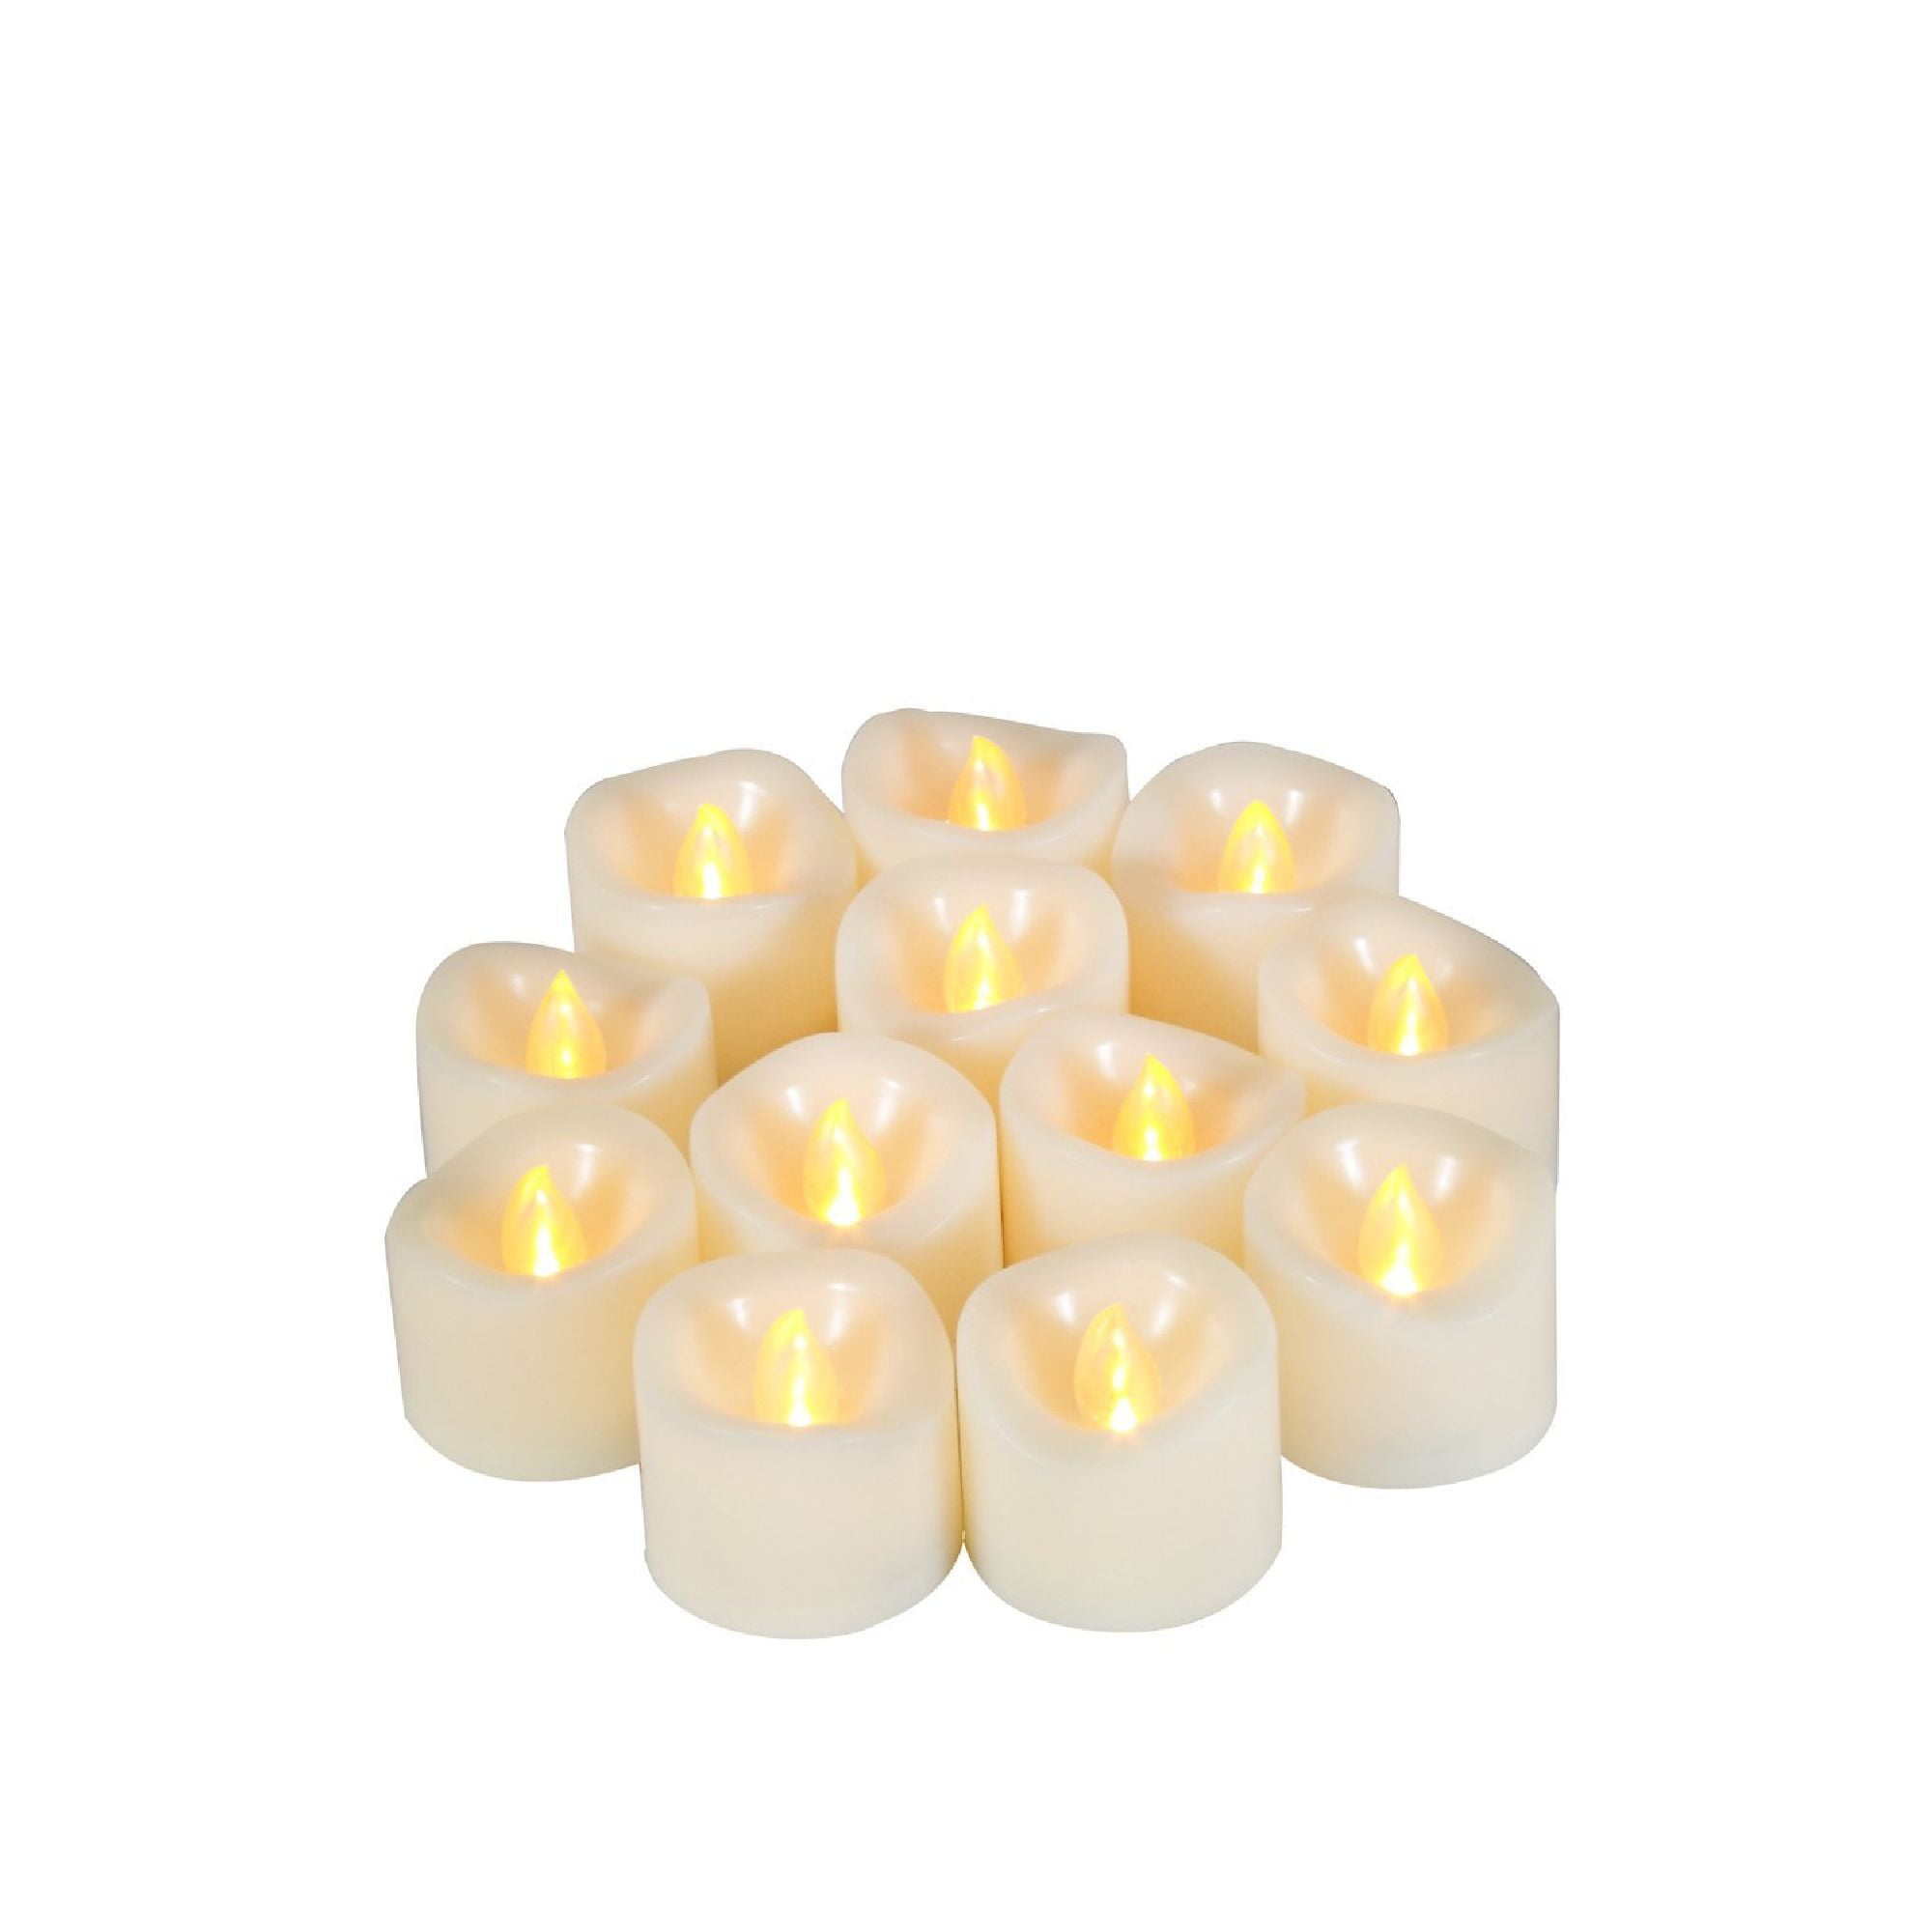 24 x Flameless Flickering LED Warm Tea Light Votive Candles BATTERIES INCLUDED 